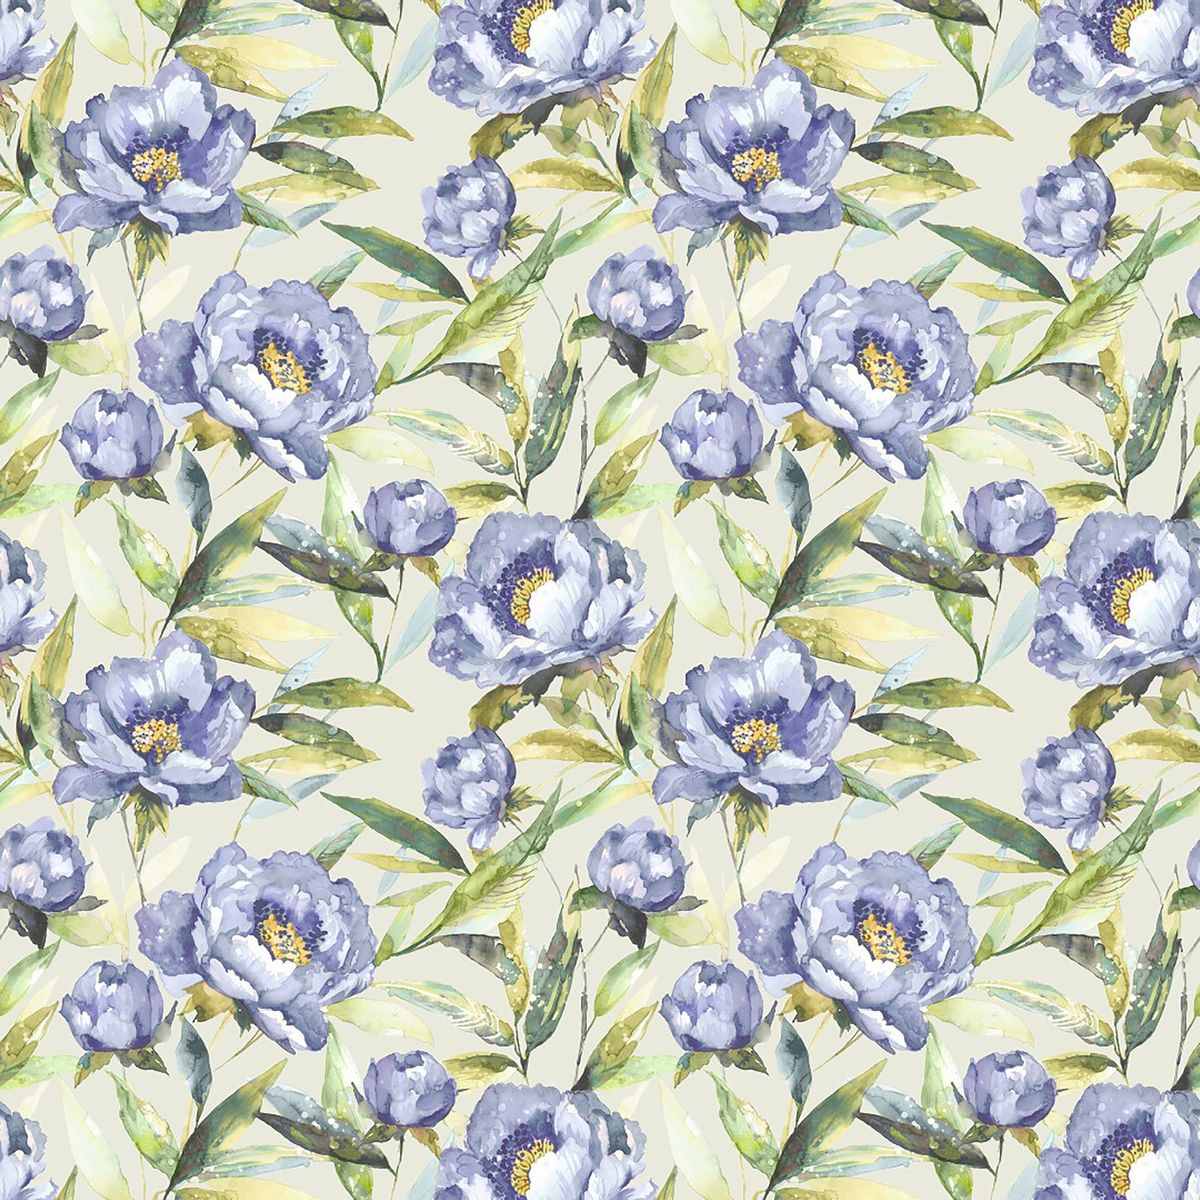 Earnley Bluebell Fabric by Voyage Maison